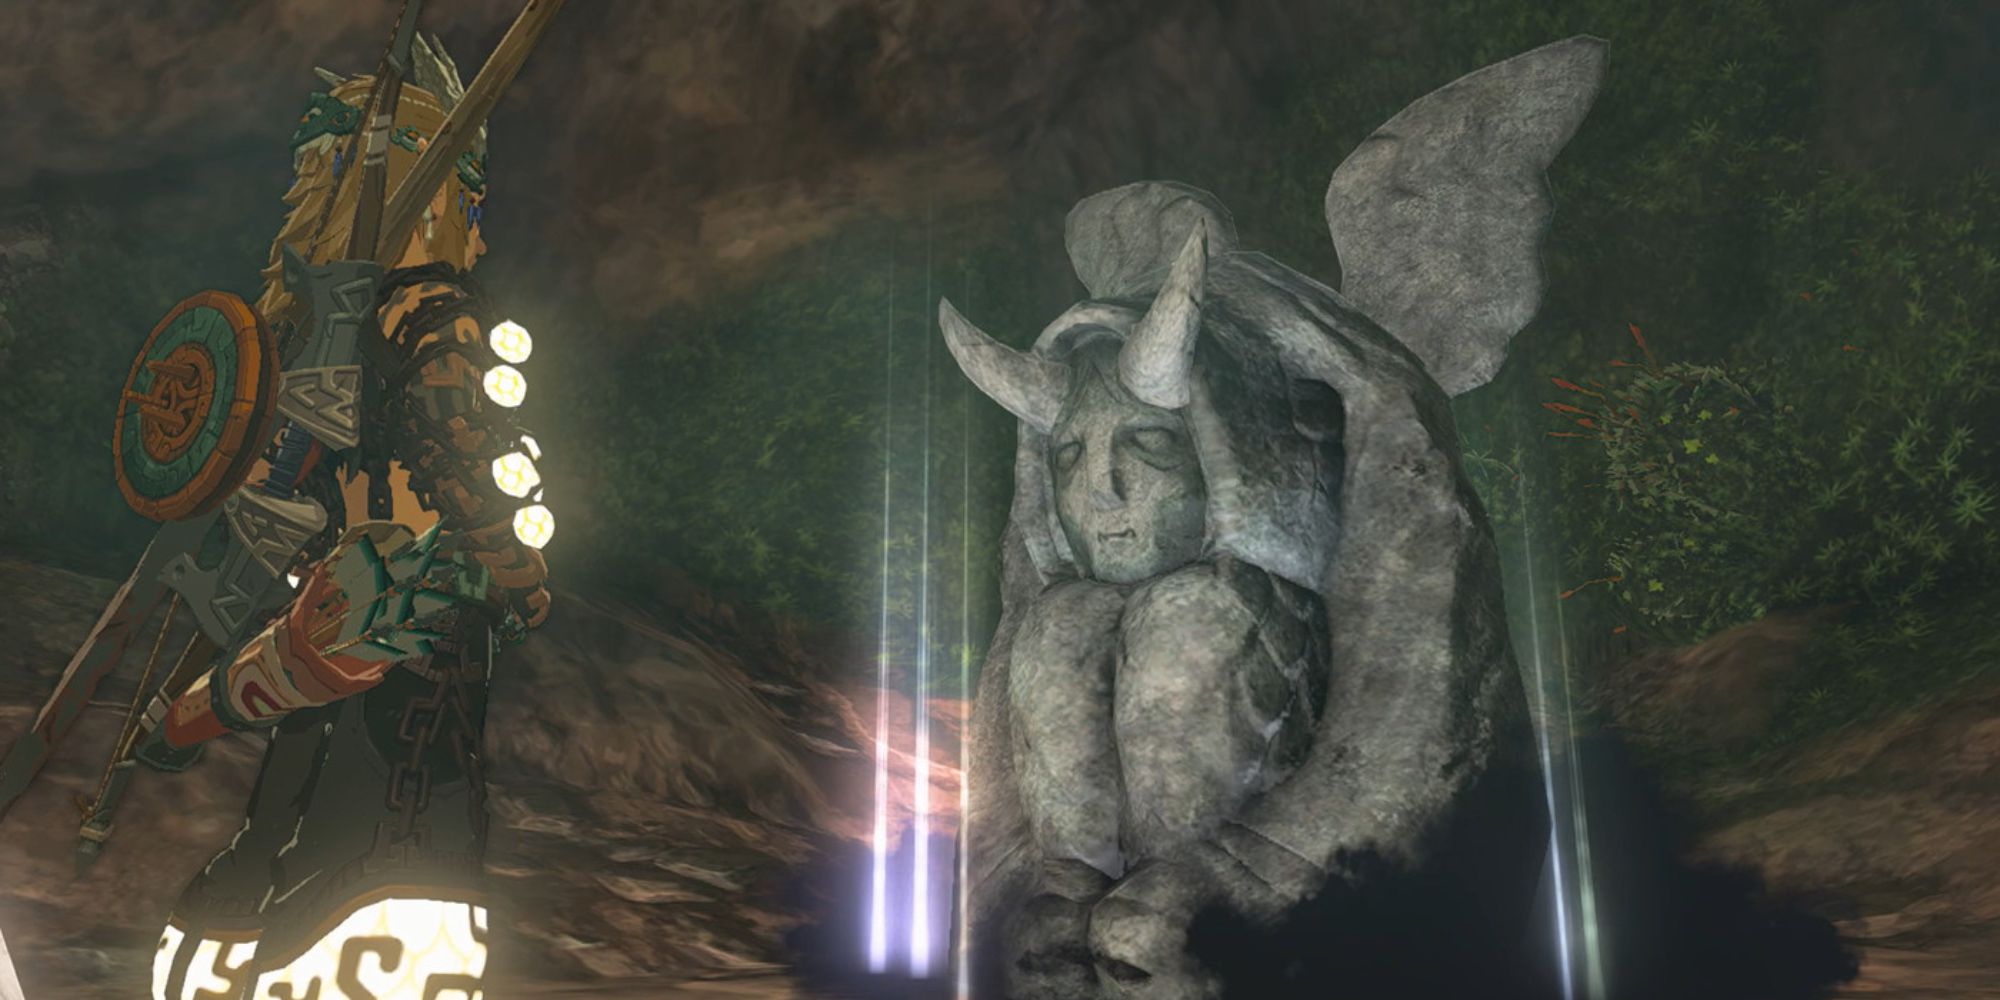 Link looking at a glowing horned statue